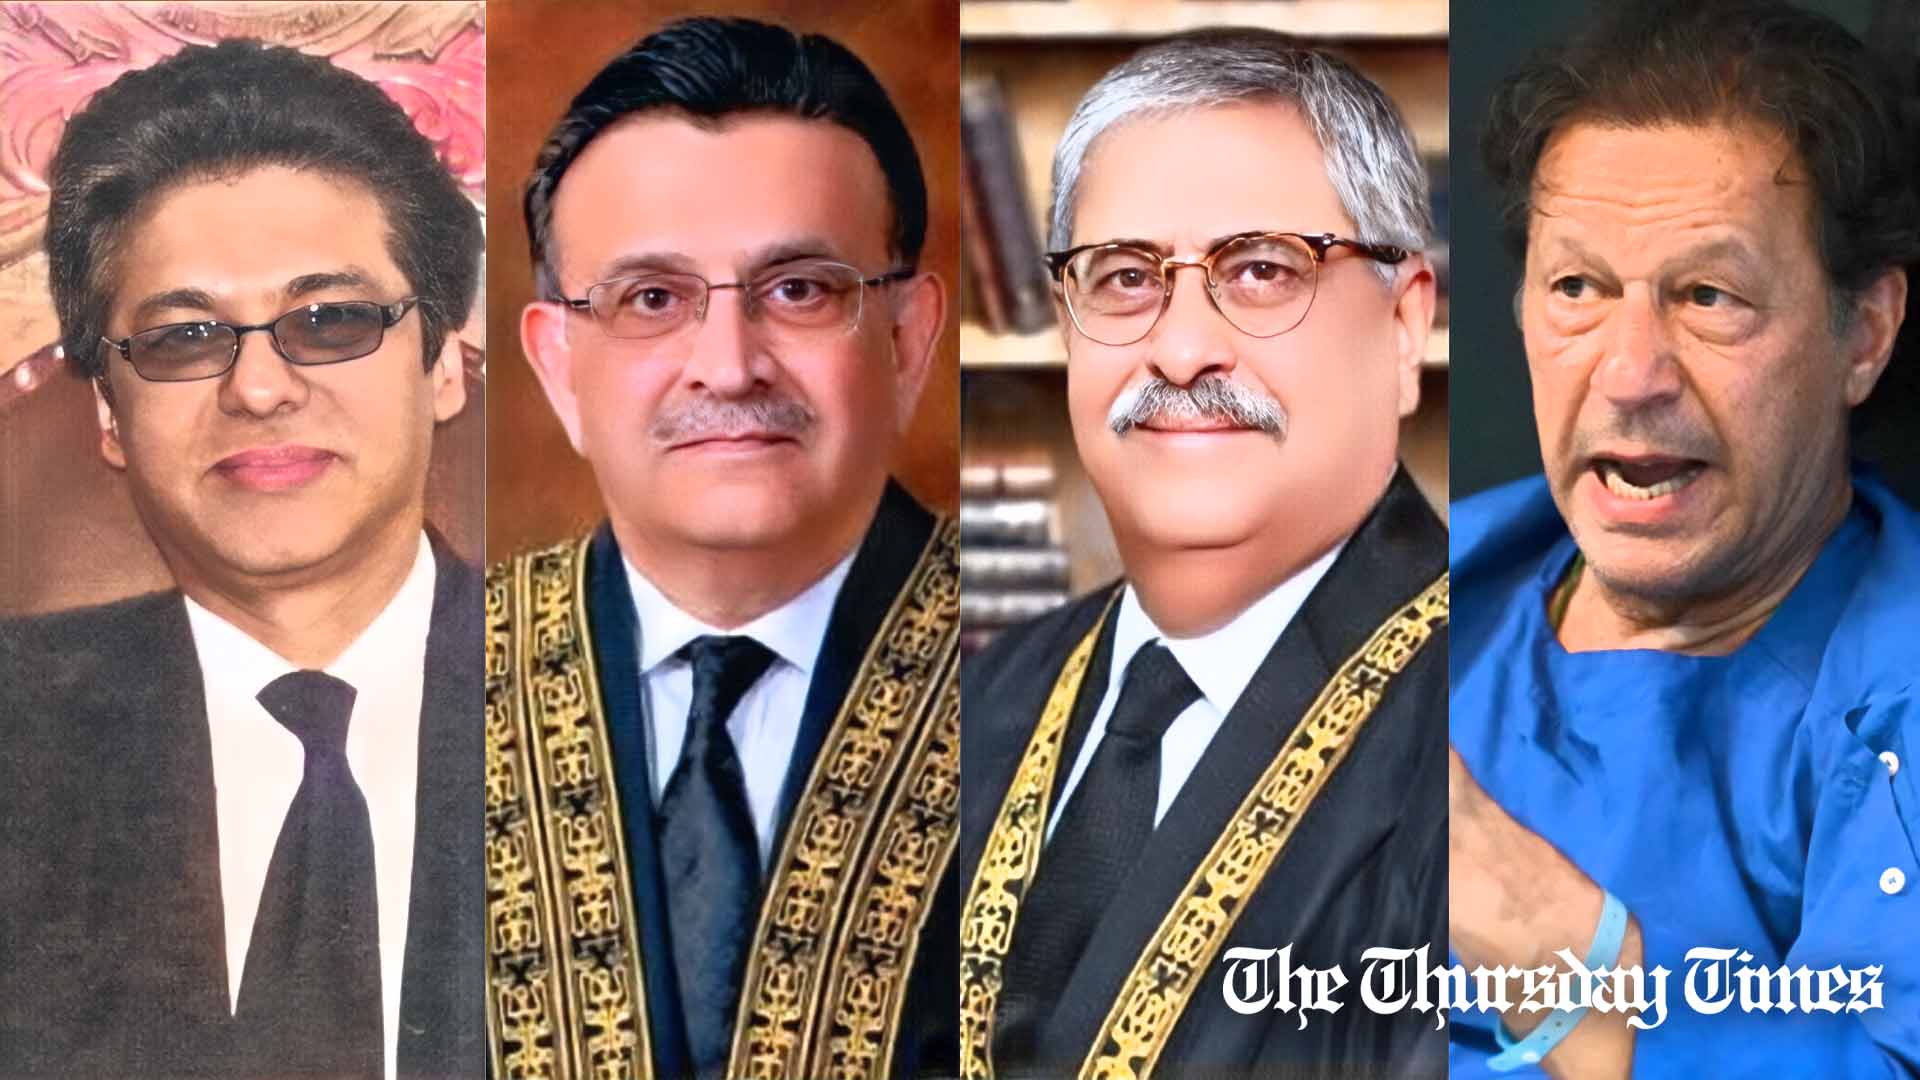 A combination file photo is shown of Supreme Court JJs Justice Muhammad Ali Mazhar (L), Chief Justice Umar Ata Bandial, Justice Athar Minallah, and PTI chairman Imran Khan. — FILE/THE THURSDAY TIMES